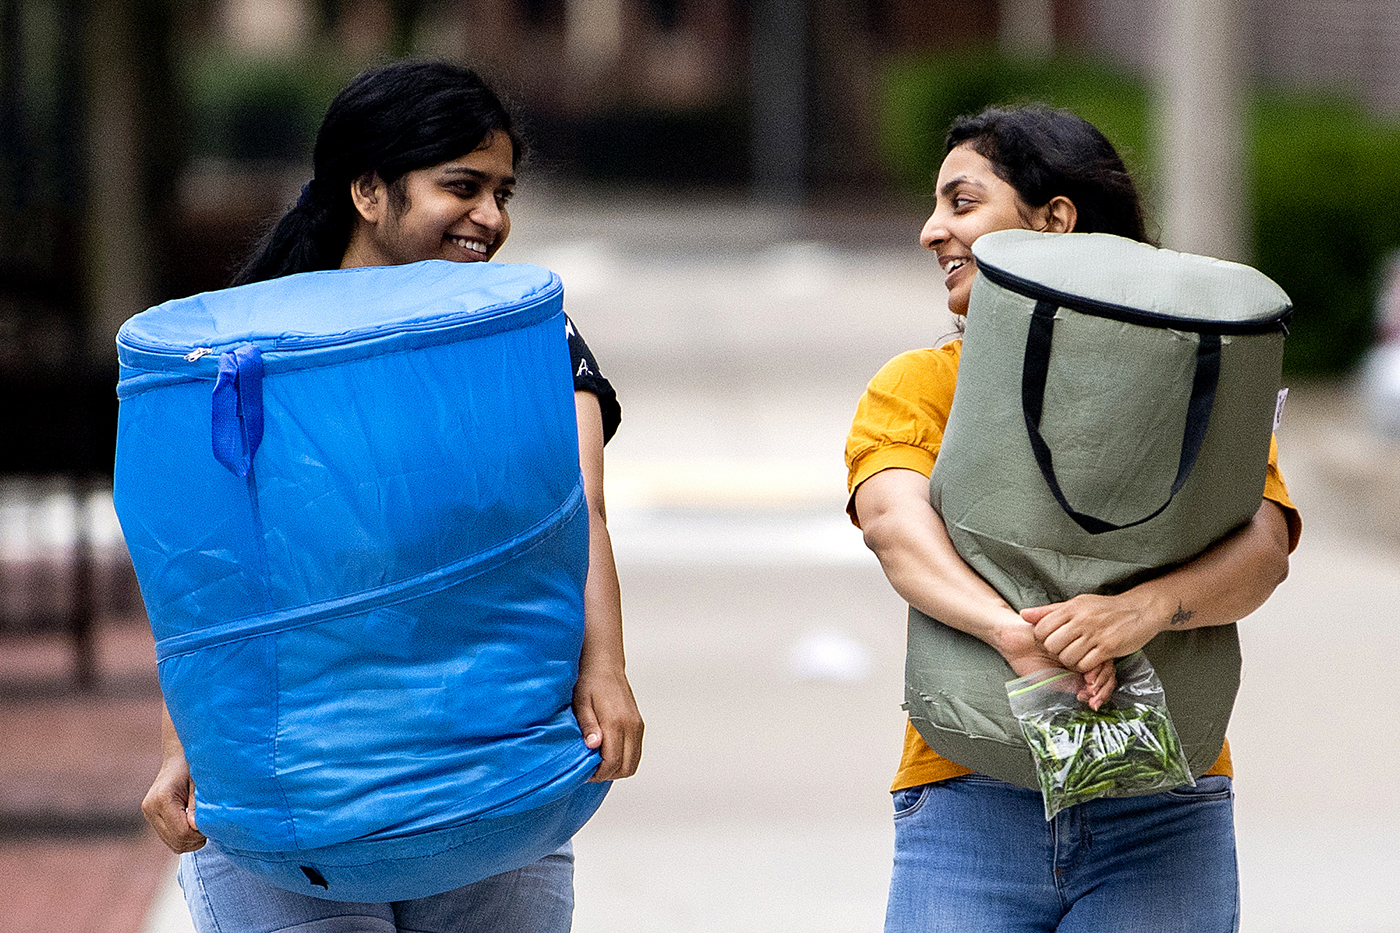 students holding bags as they move in